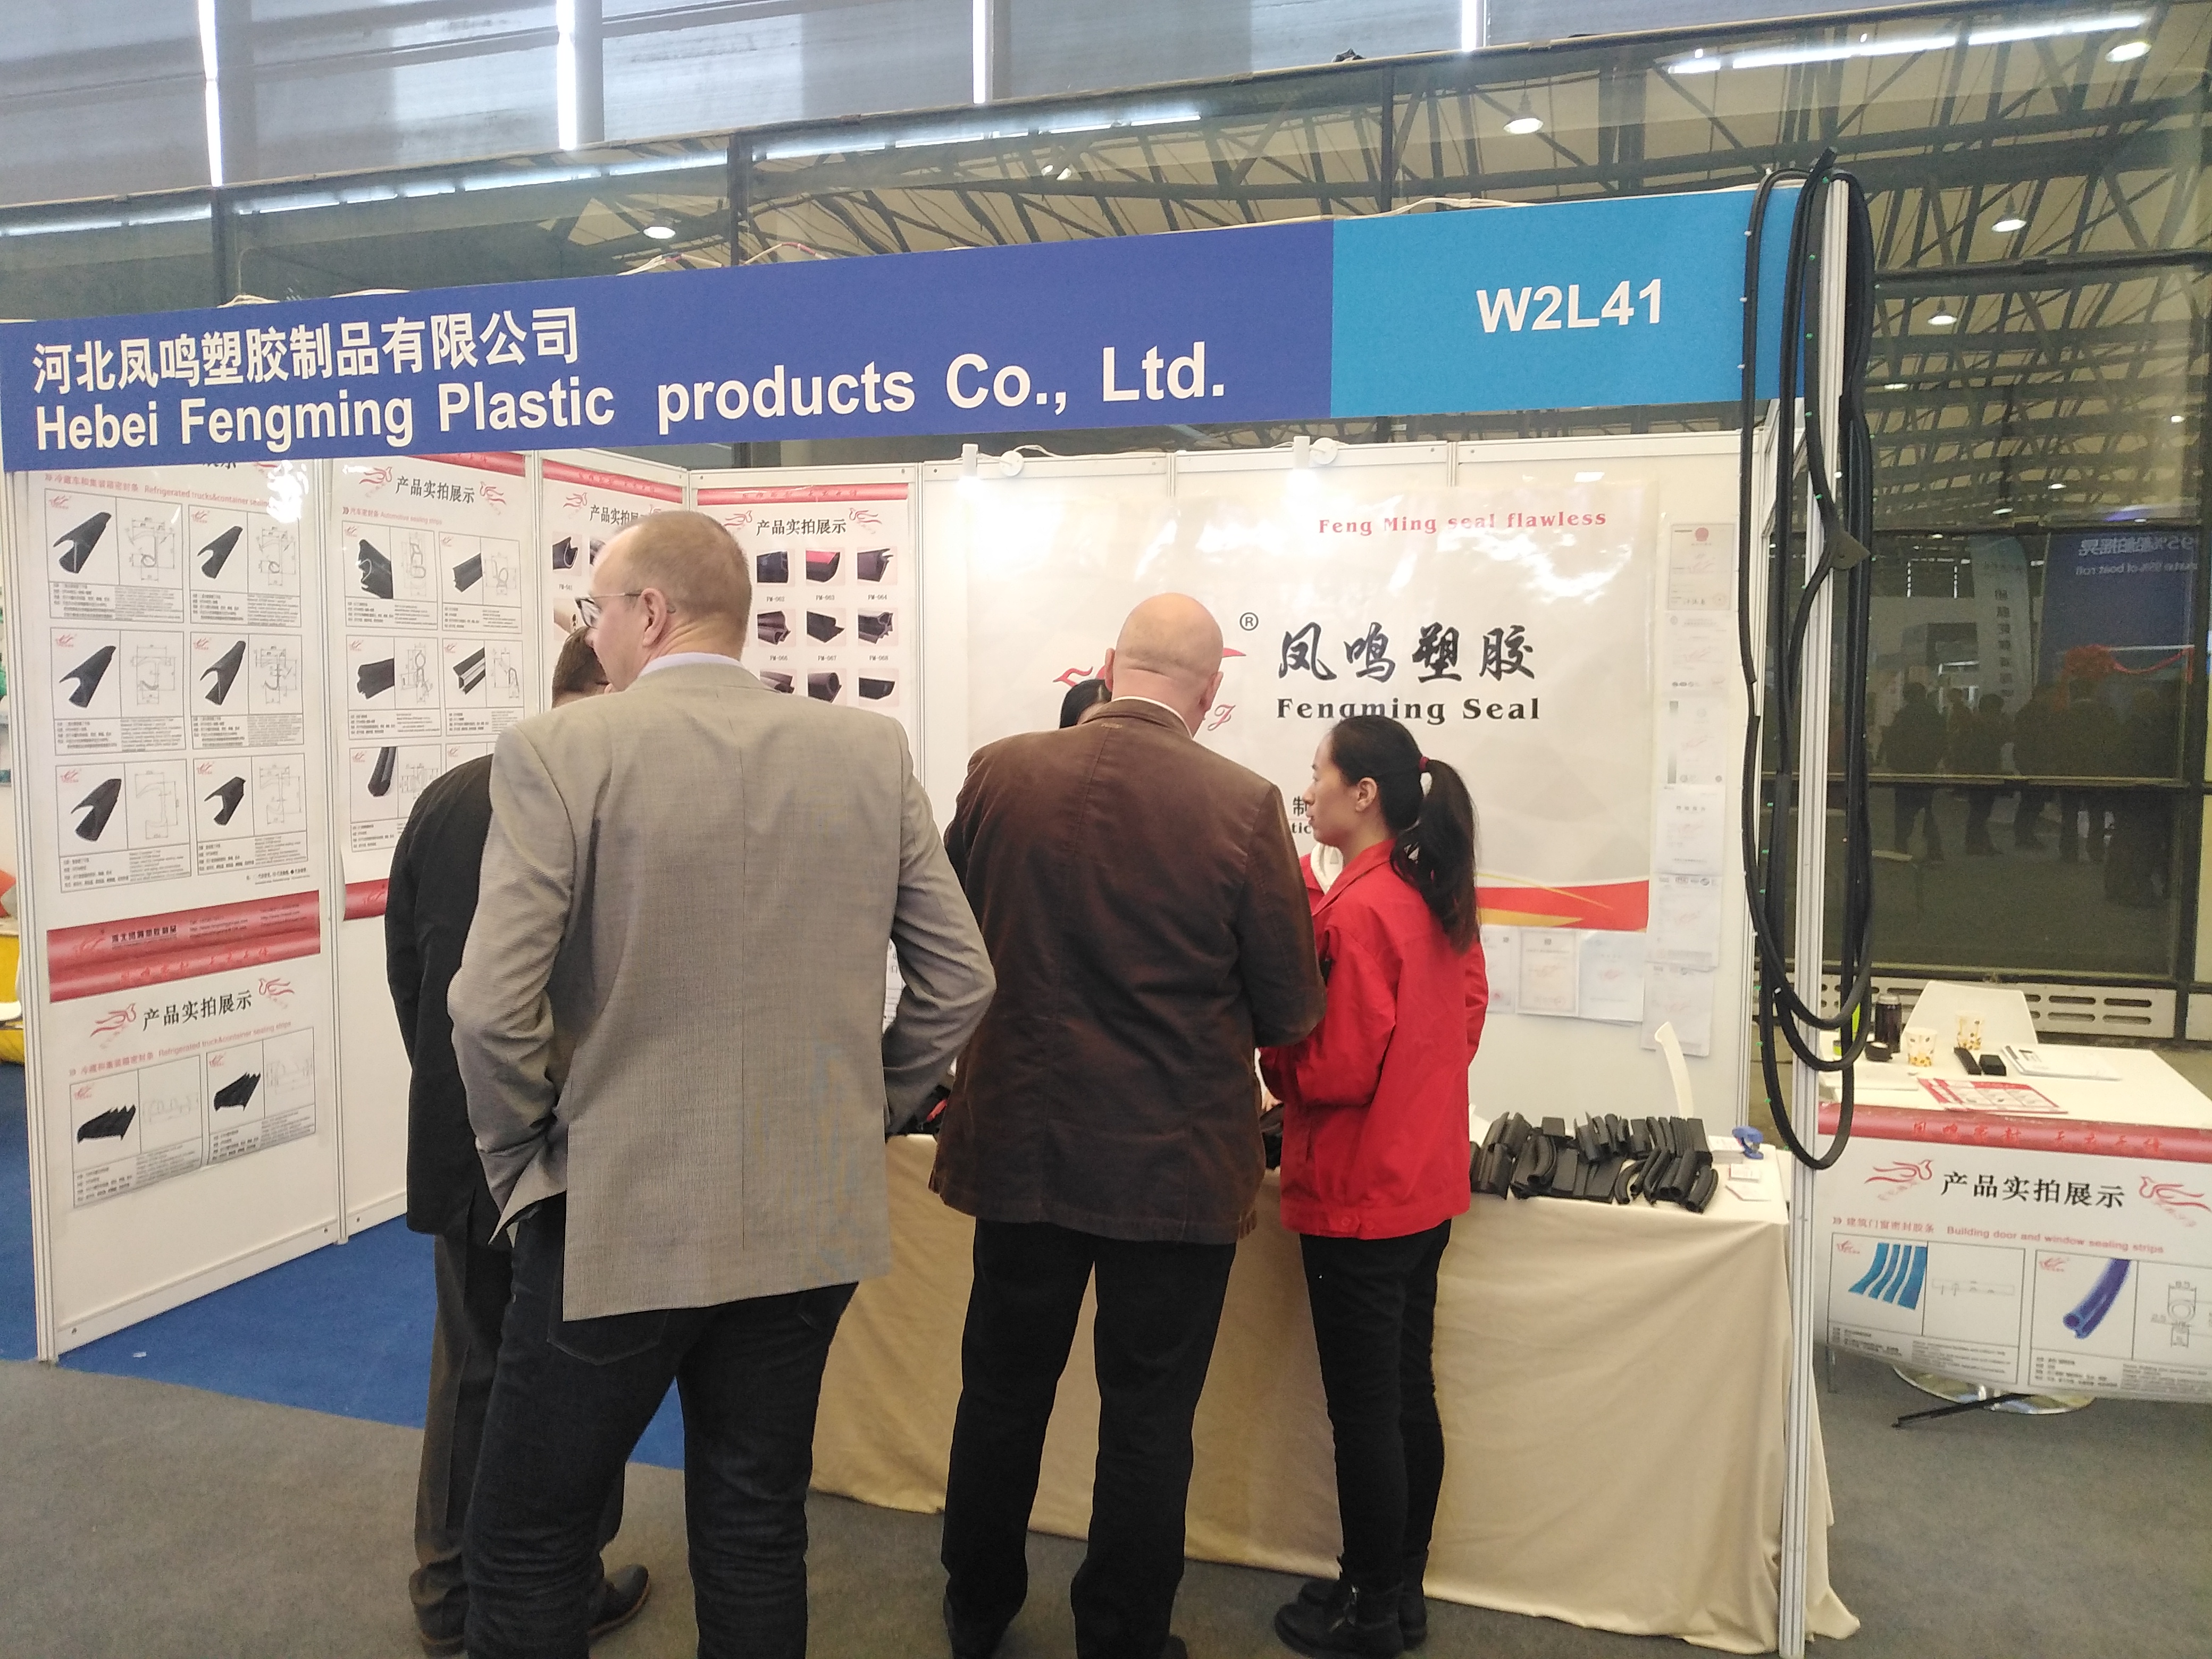 A lot of exchanges, full of gains, sharing in Shanghai Fengming Shanghai Exhibition